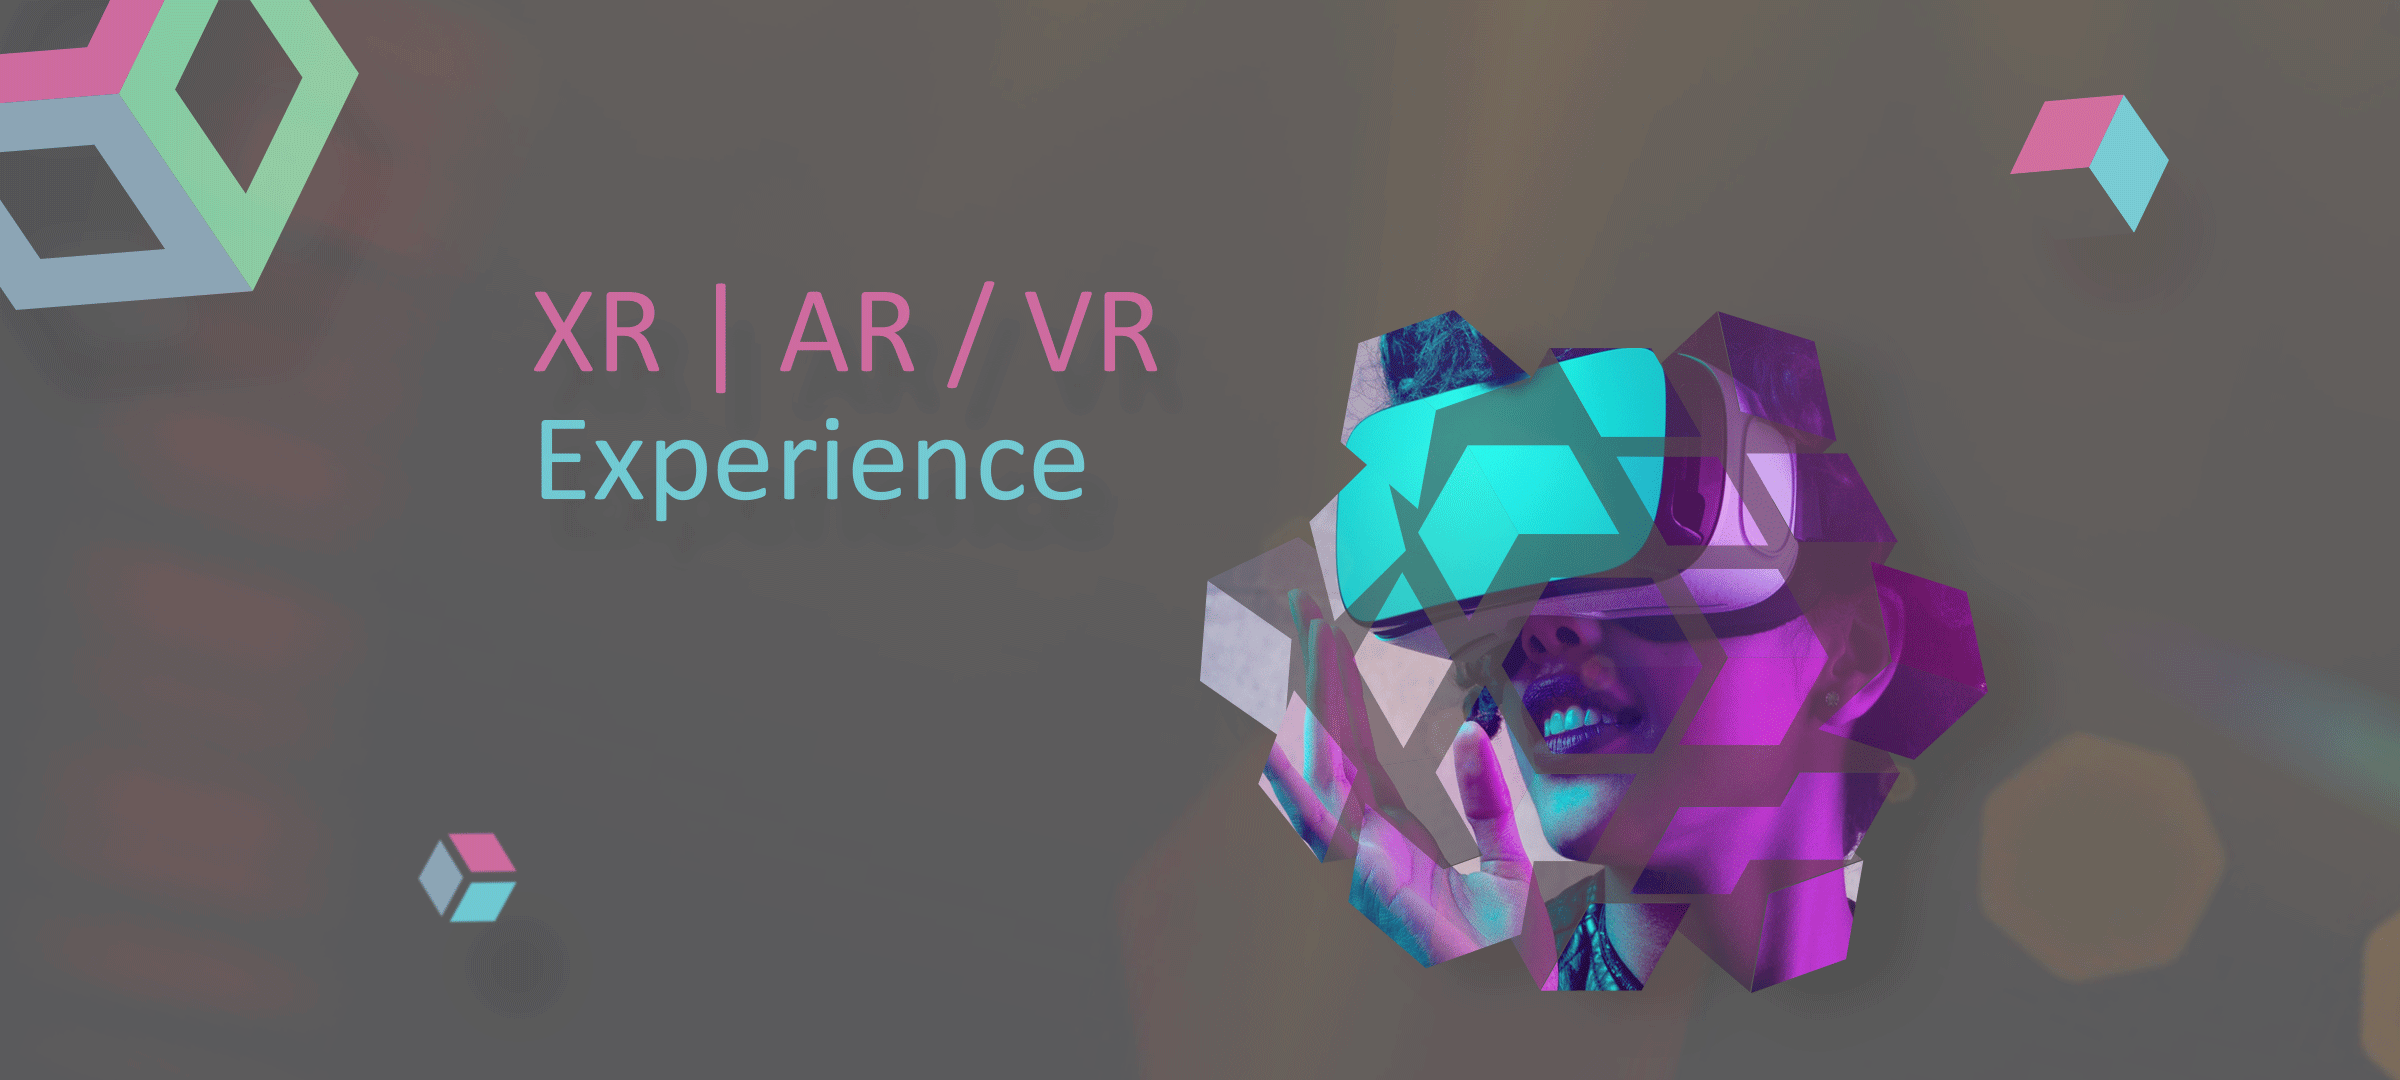 VR_BOARD_01.png